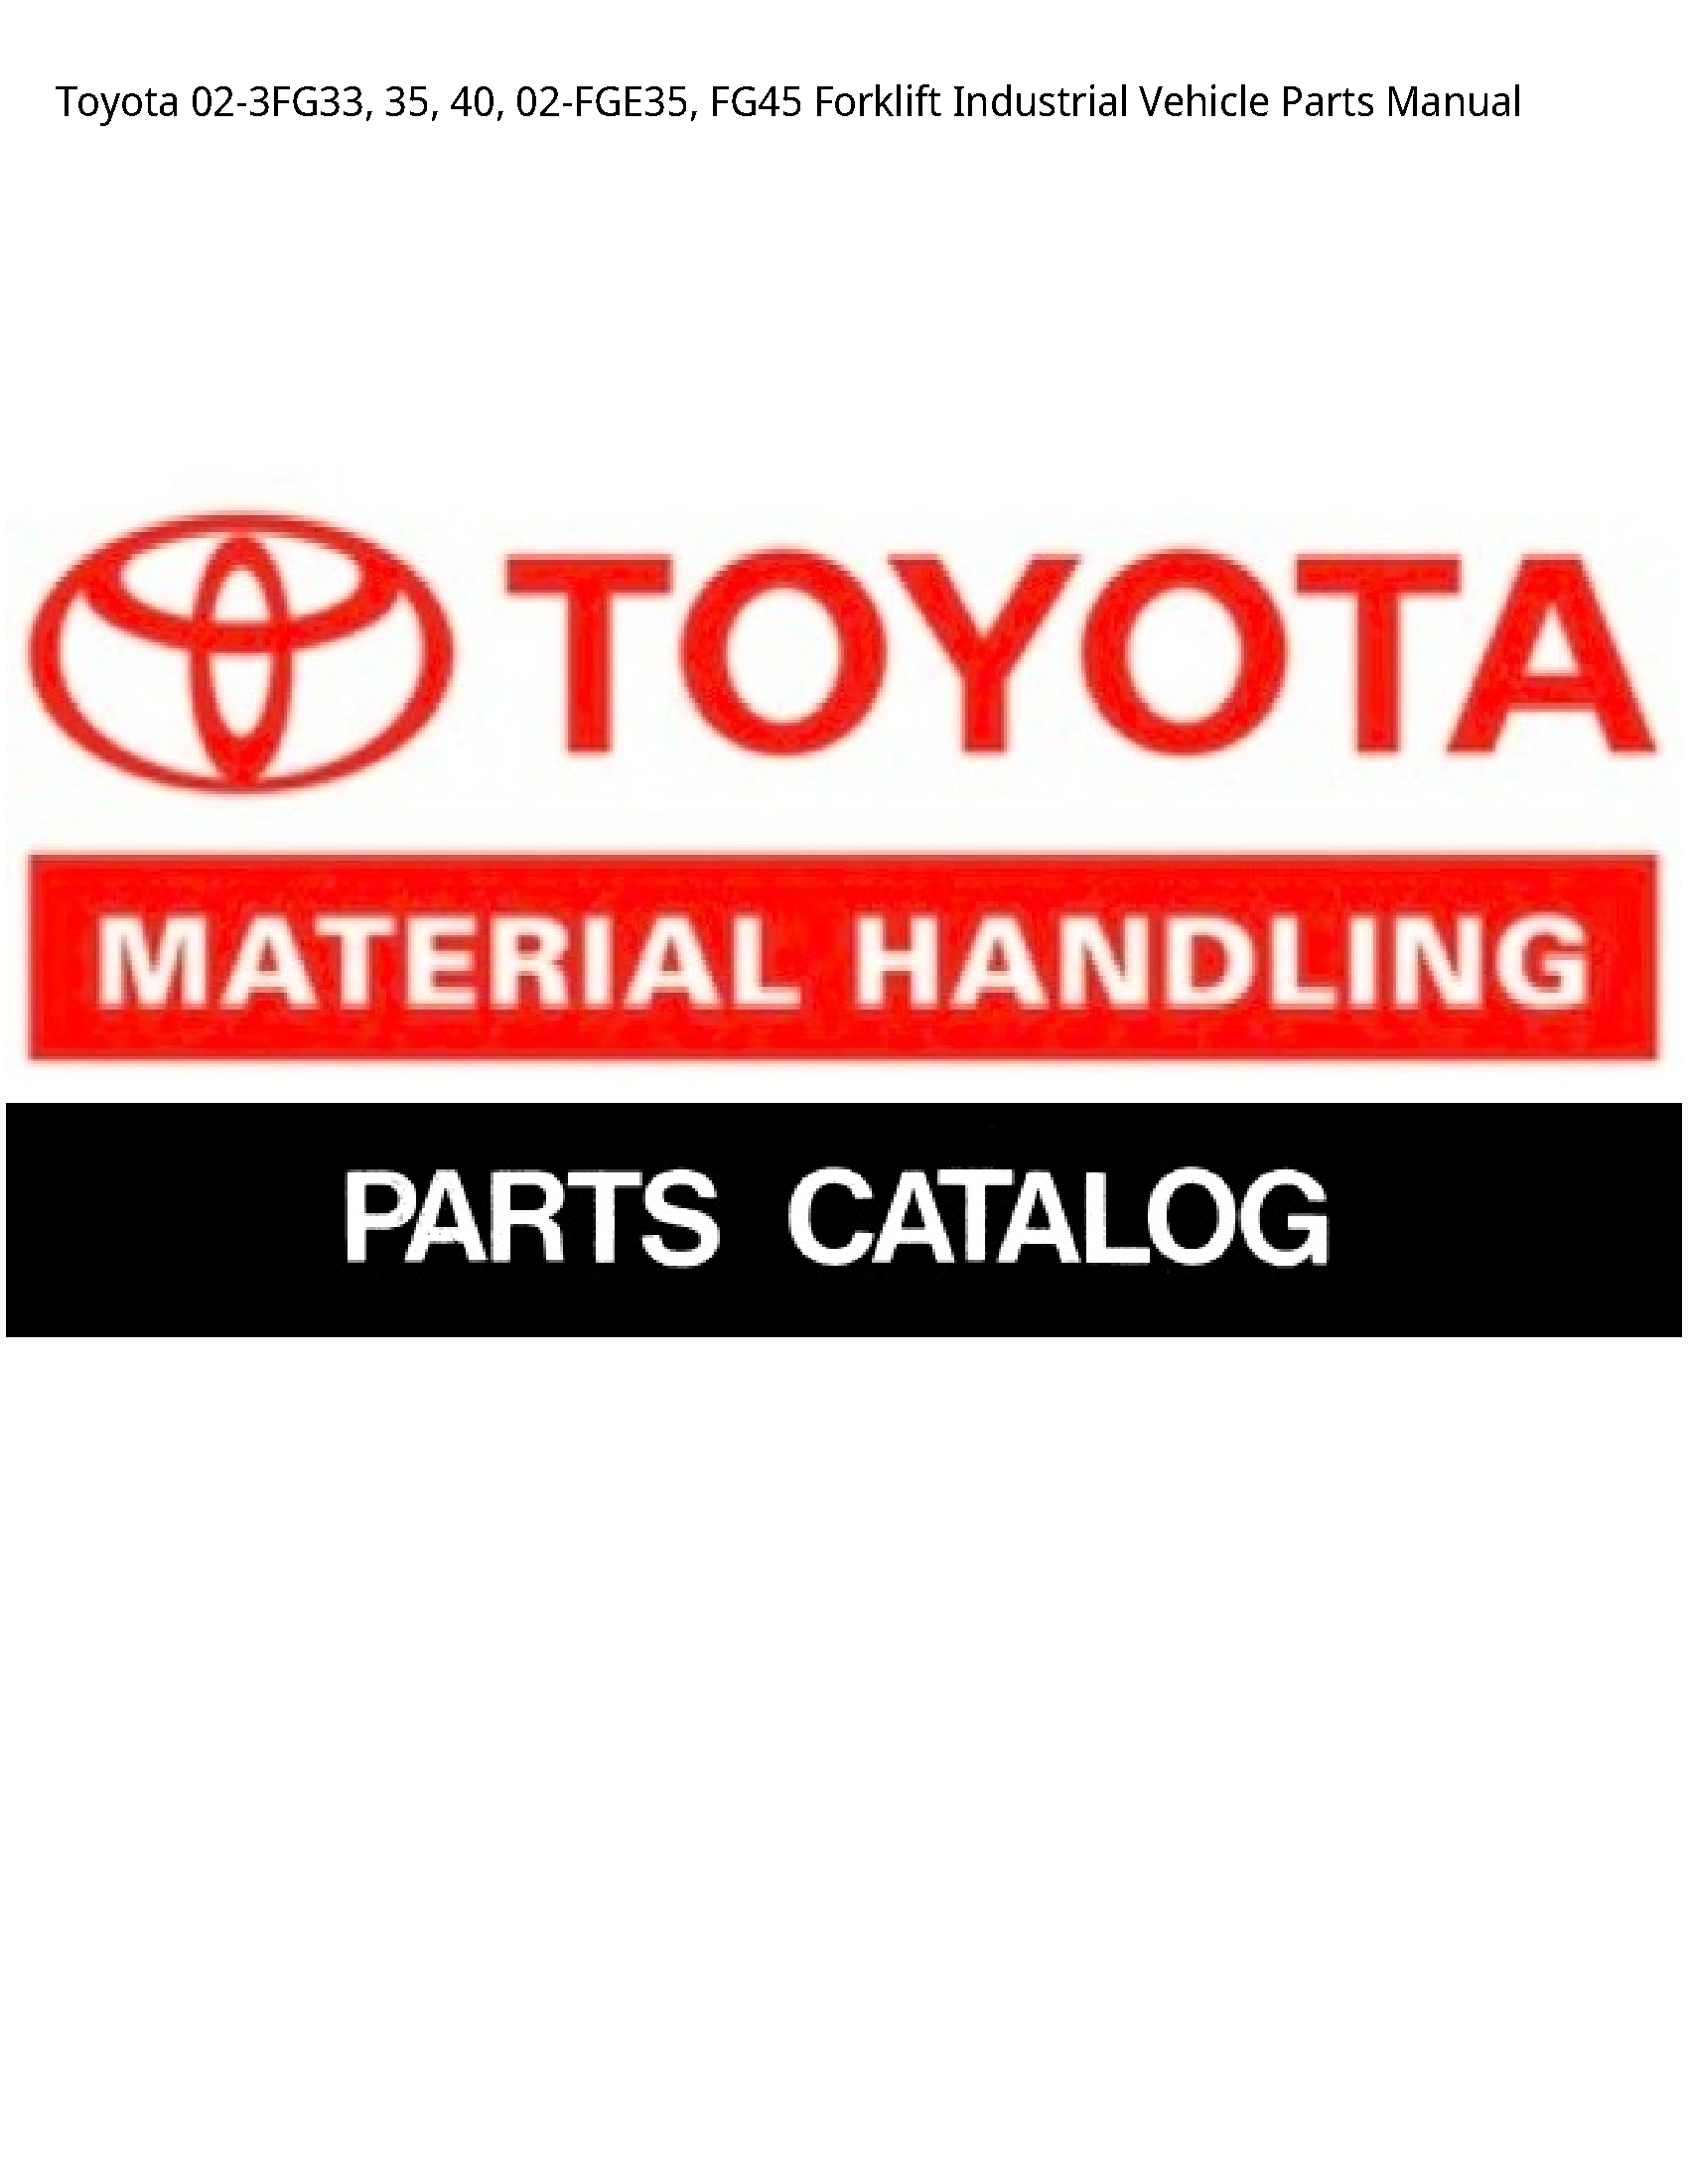 Toyota 02-3FG33 Forklift Industrial Vehicle Parts manual